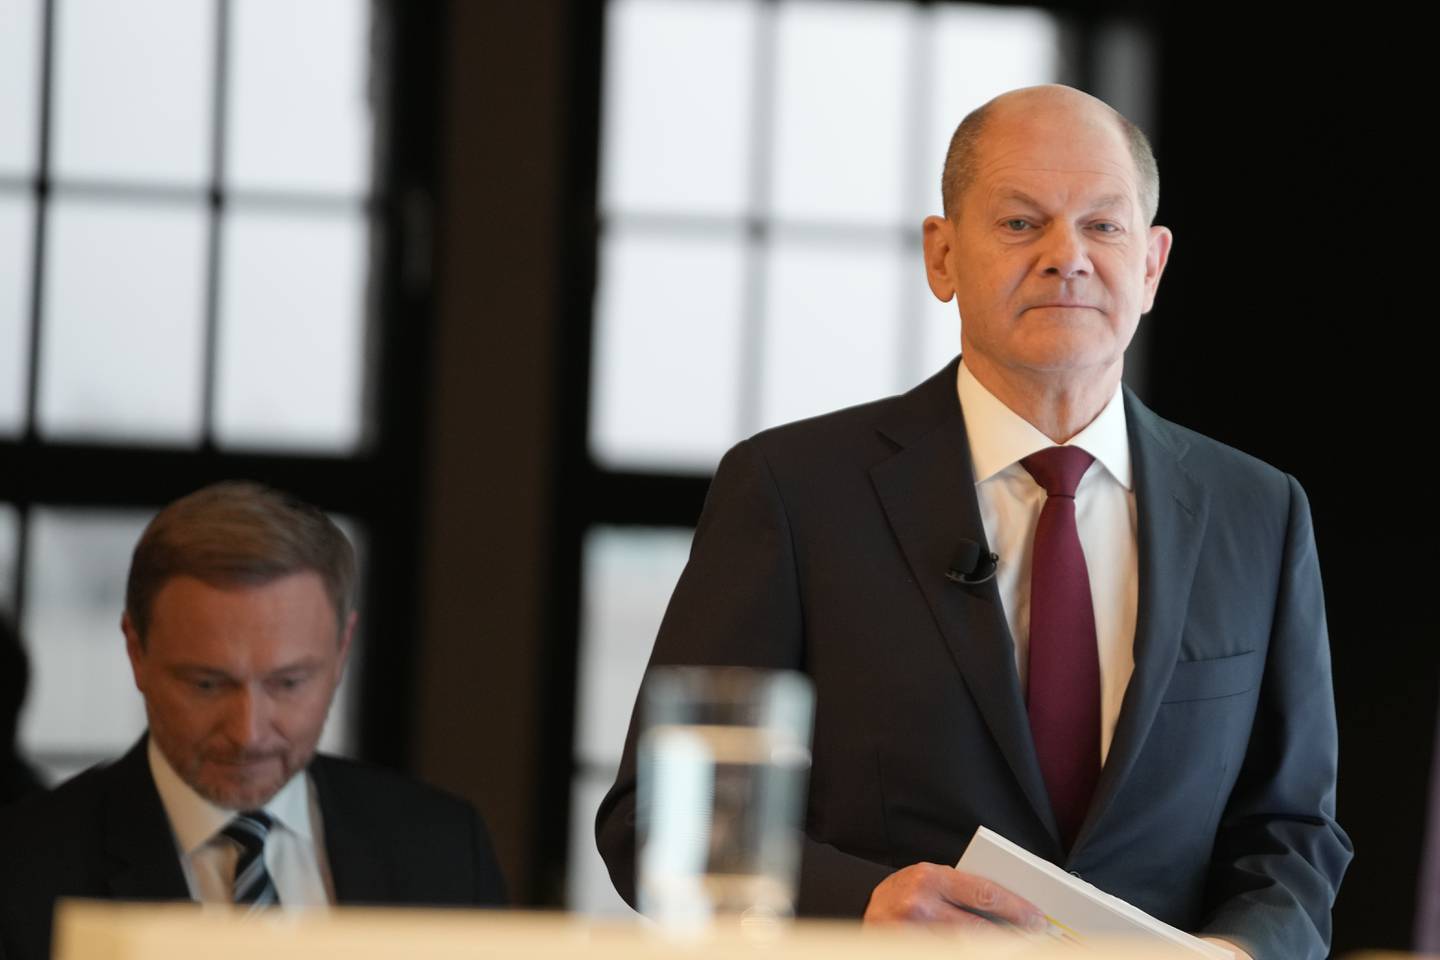 Olaf Scholz takes the stage as the three parties unveil their agreement on Wednesday. AP 